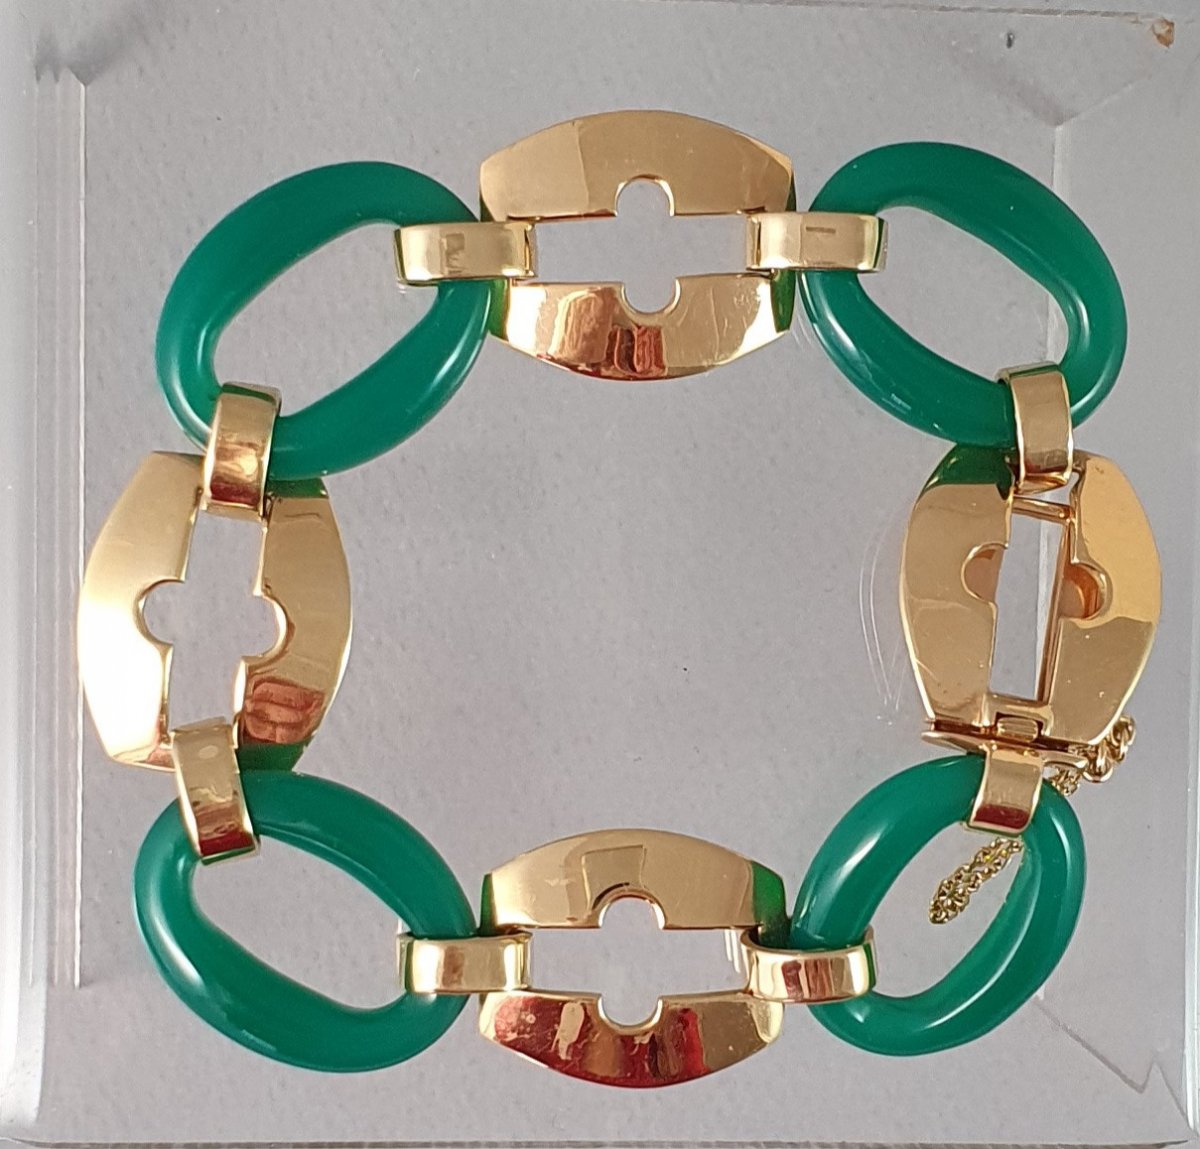 Art Deco Bangle With 4 Yellow Gold Links And 4 Chrysoprase Elements